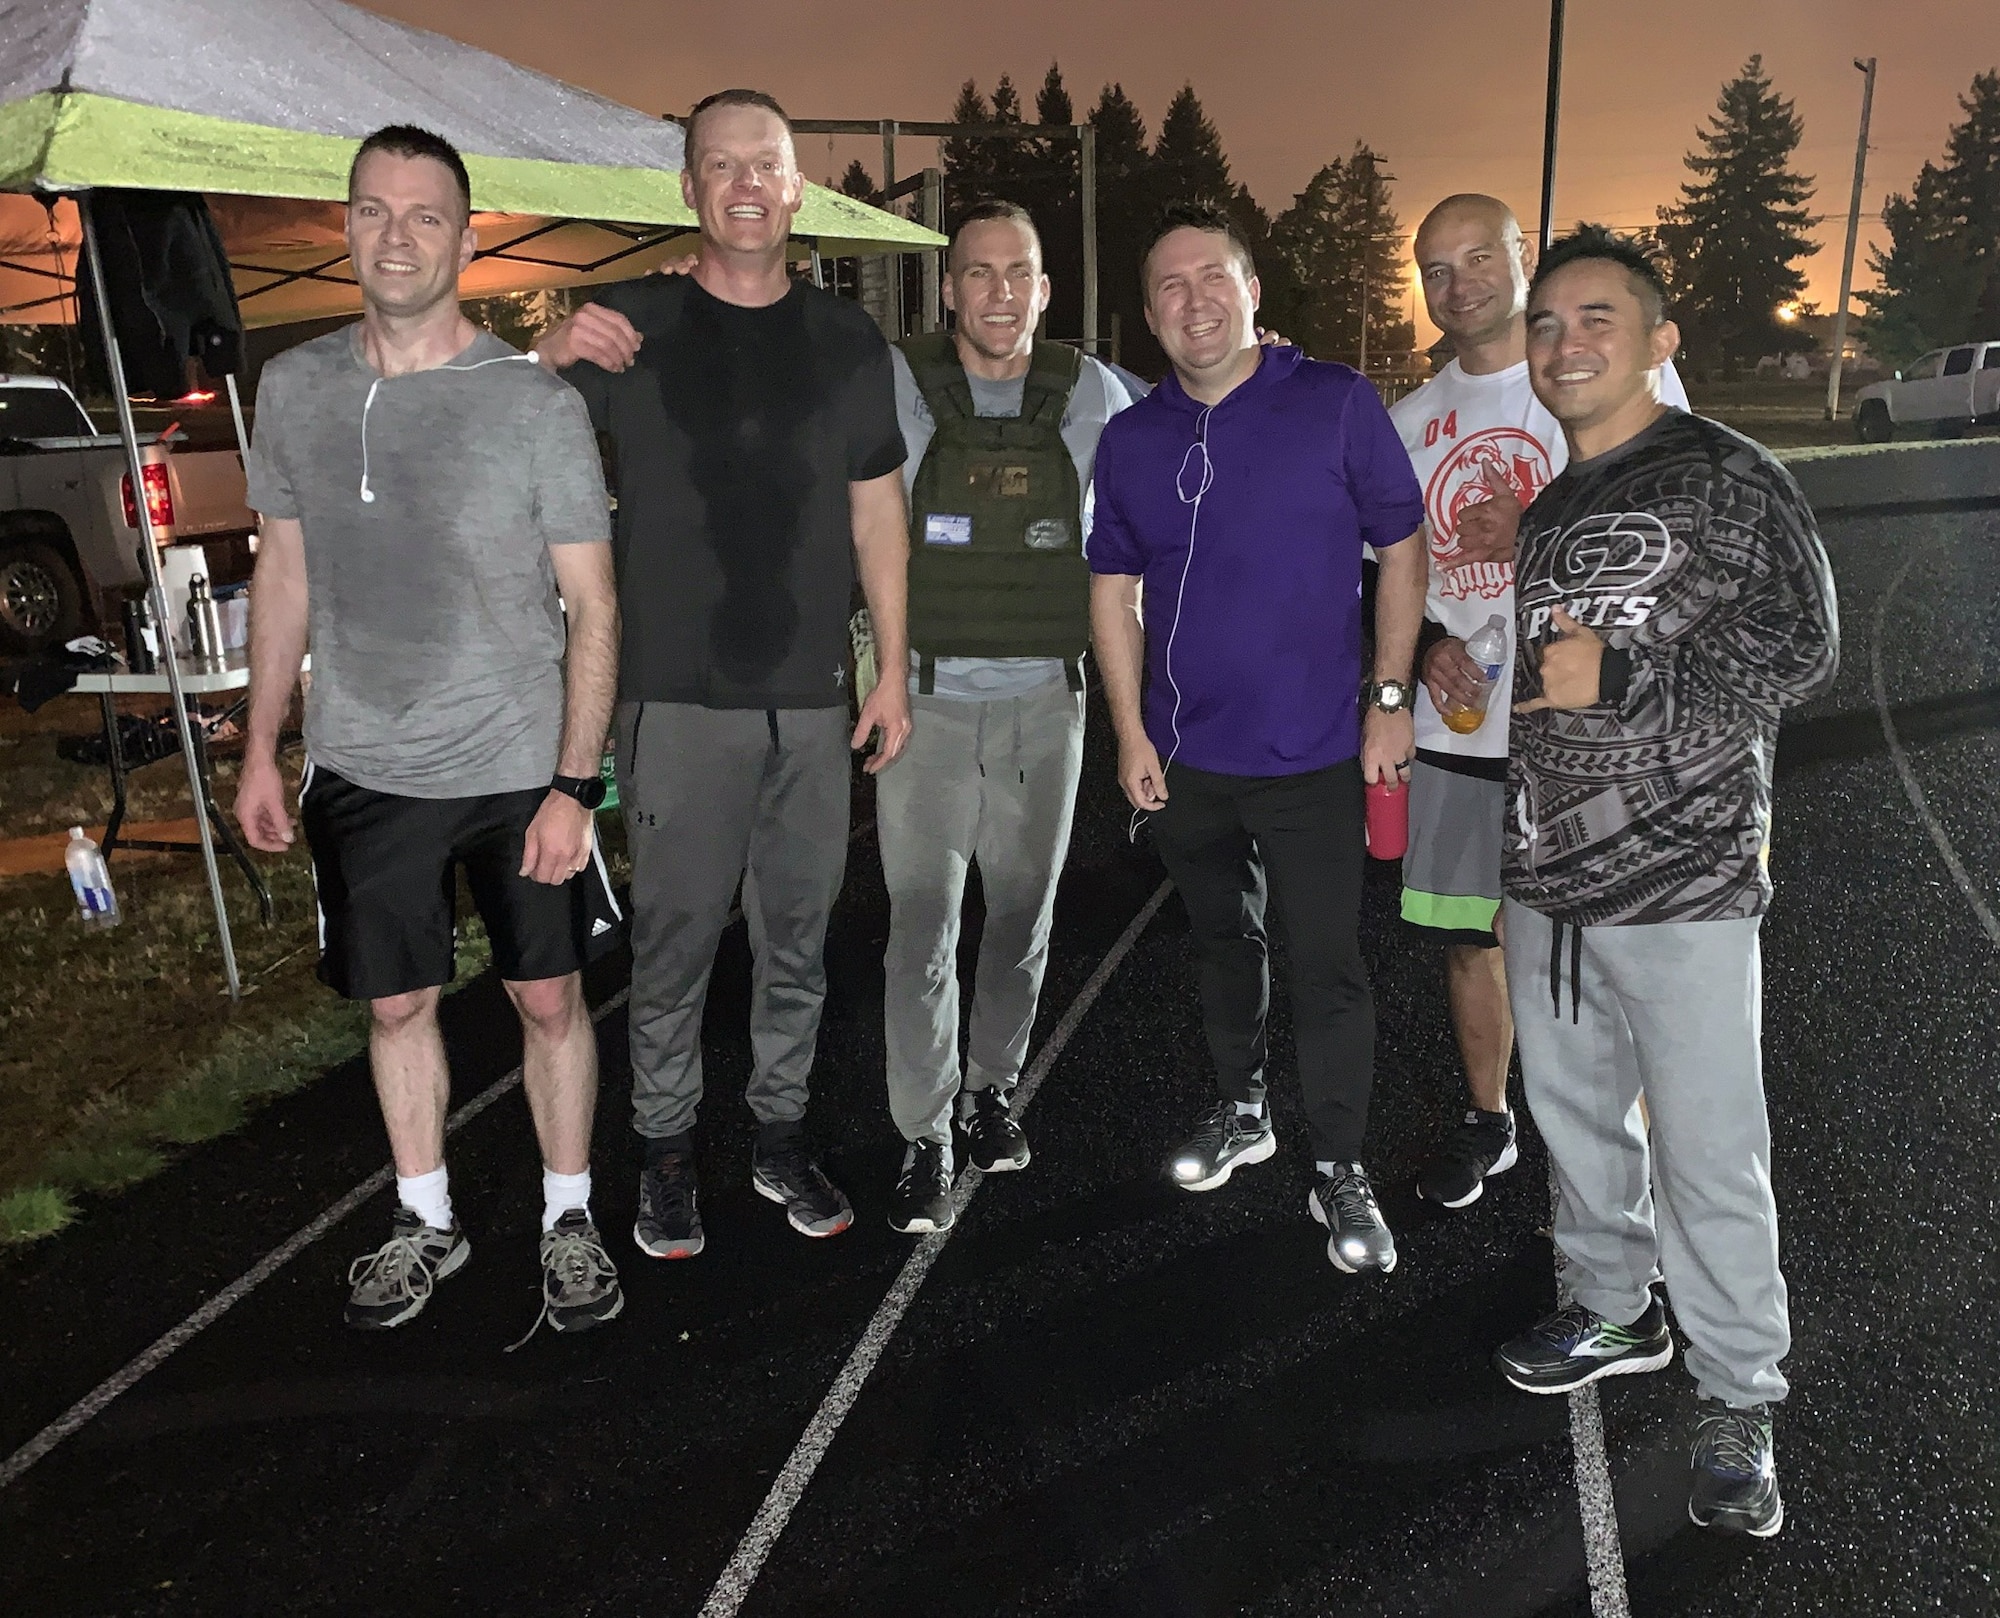 Members of the 225th Air Defense Squadron, lead by their commander Col. Brian Bergren (second from left), finished running about seven miles each during the POW/MIA Remembrance Run on Joint Base Lewis-McChord Sept. 19, 2019. (Courtesy photo)